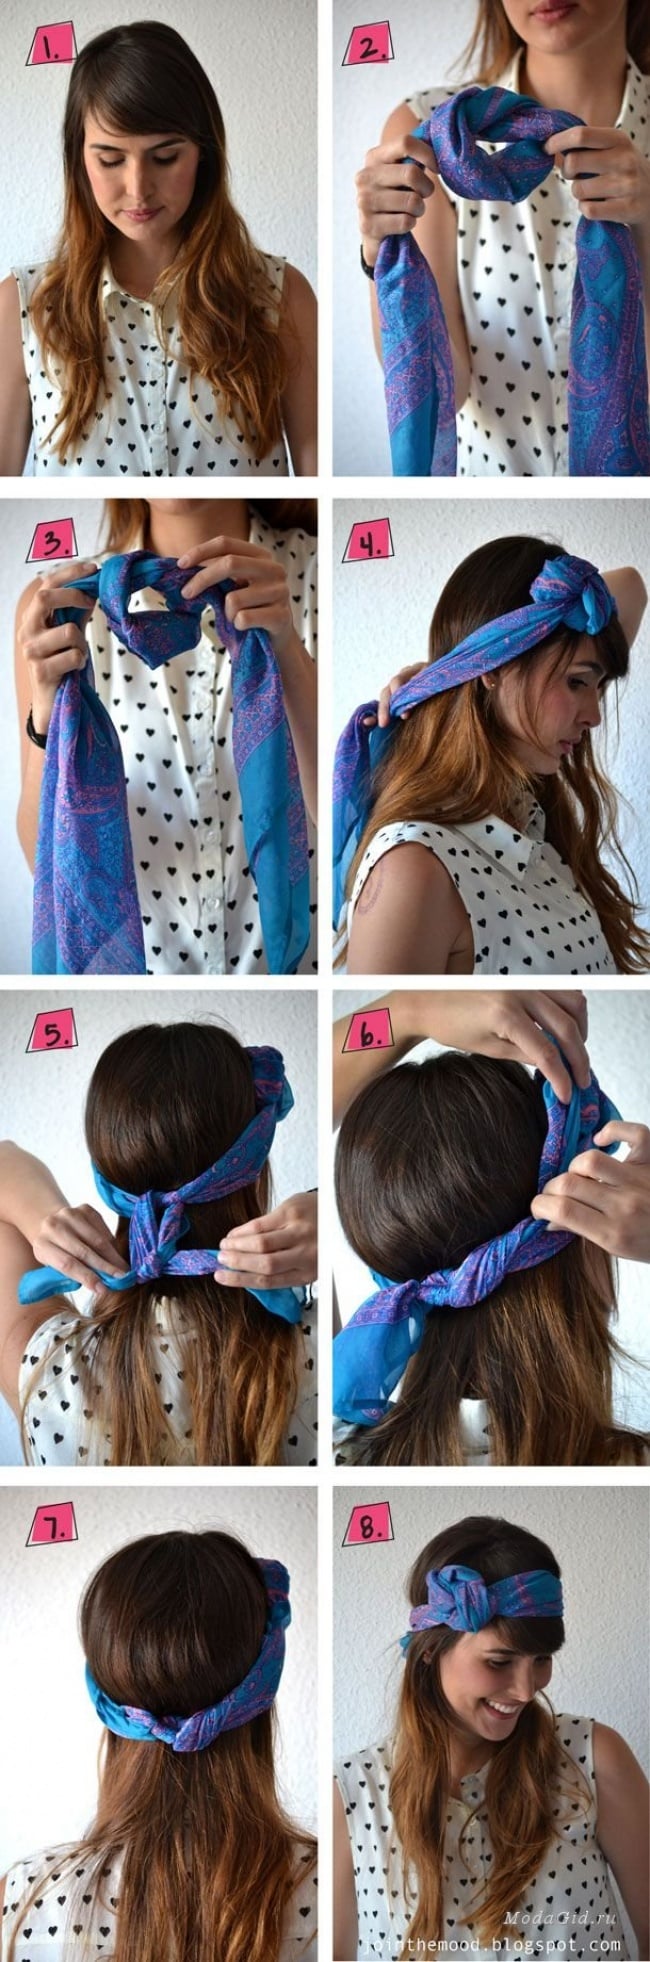 7746160-650-1458041986-large_Knotted-Scarf-Hairband